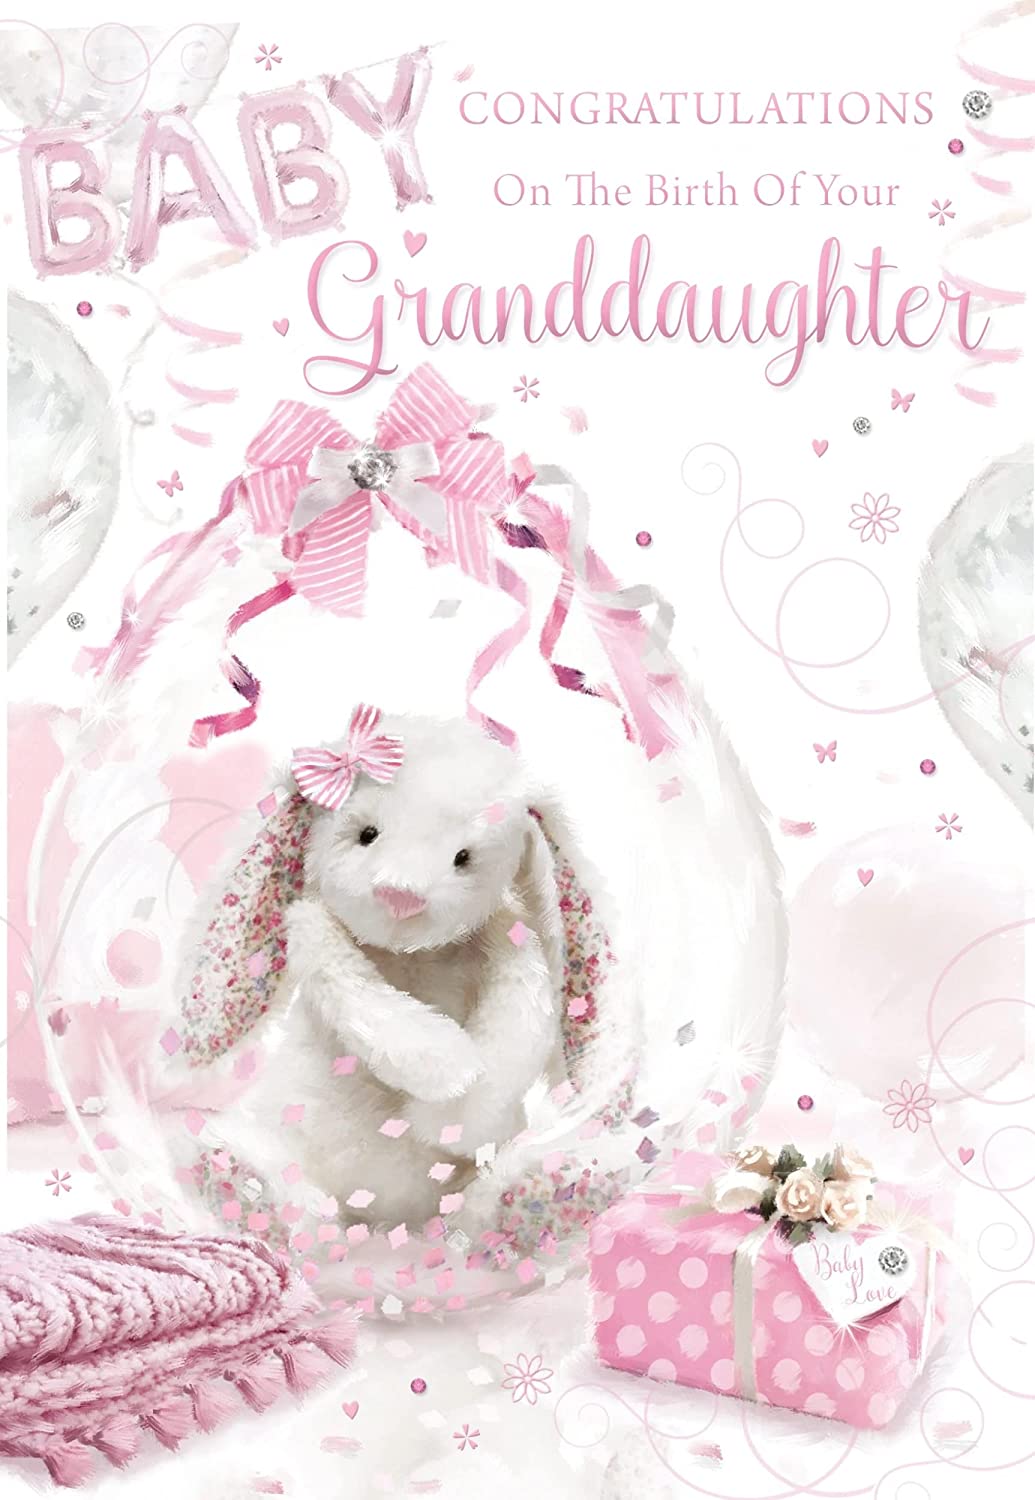 Birth Of Your Granddaughter Card - Cute Rabbit In A Balloon And Gifts